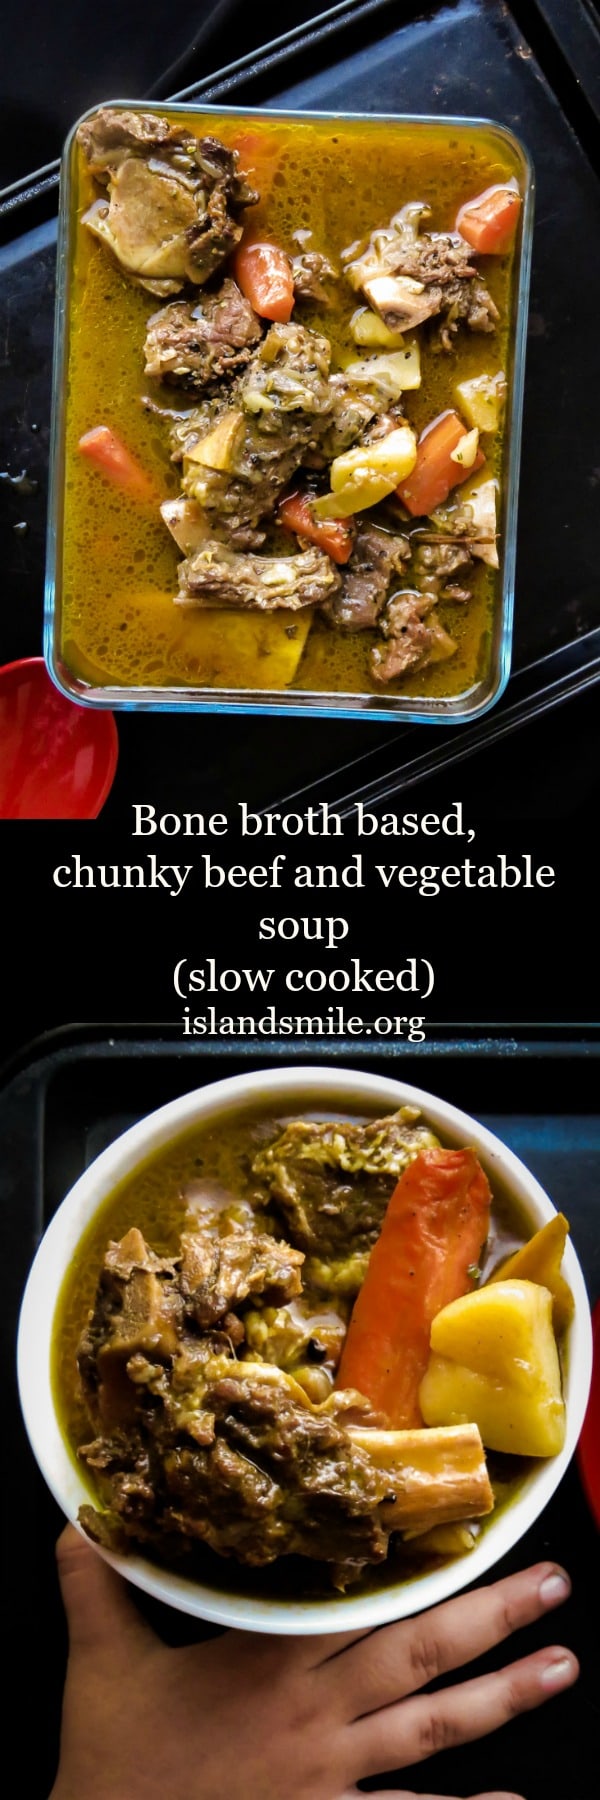 Bone broth based, chunky beef and vegetable soup. nutritious and ideal for ketogenic diets. Slow cooked to add big, bold flavors to feed your family. take advantage of the healing benefits of bone broth. #keto #bonebroth #healthy #soup #beef #vegetable #lowcarb #slowcooked #bonebroth